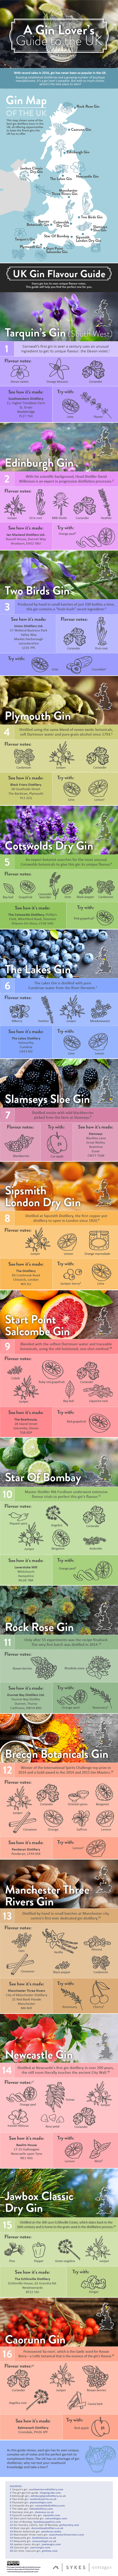 These UK Gin Flavors Will Wow Your Taste Buds (Infographics)